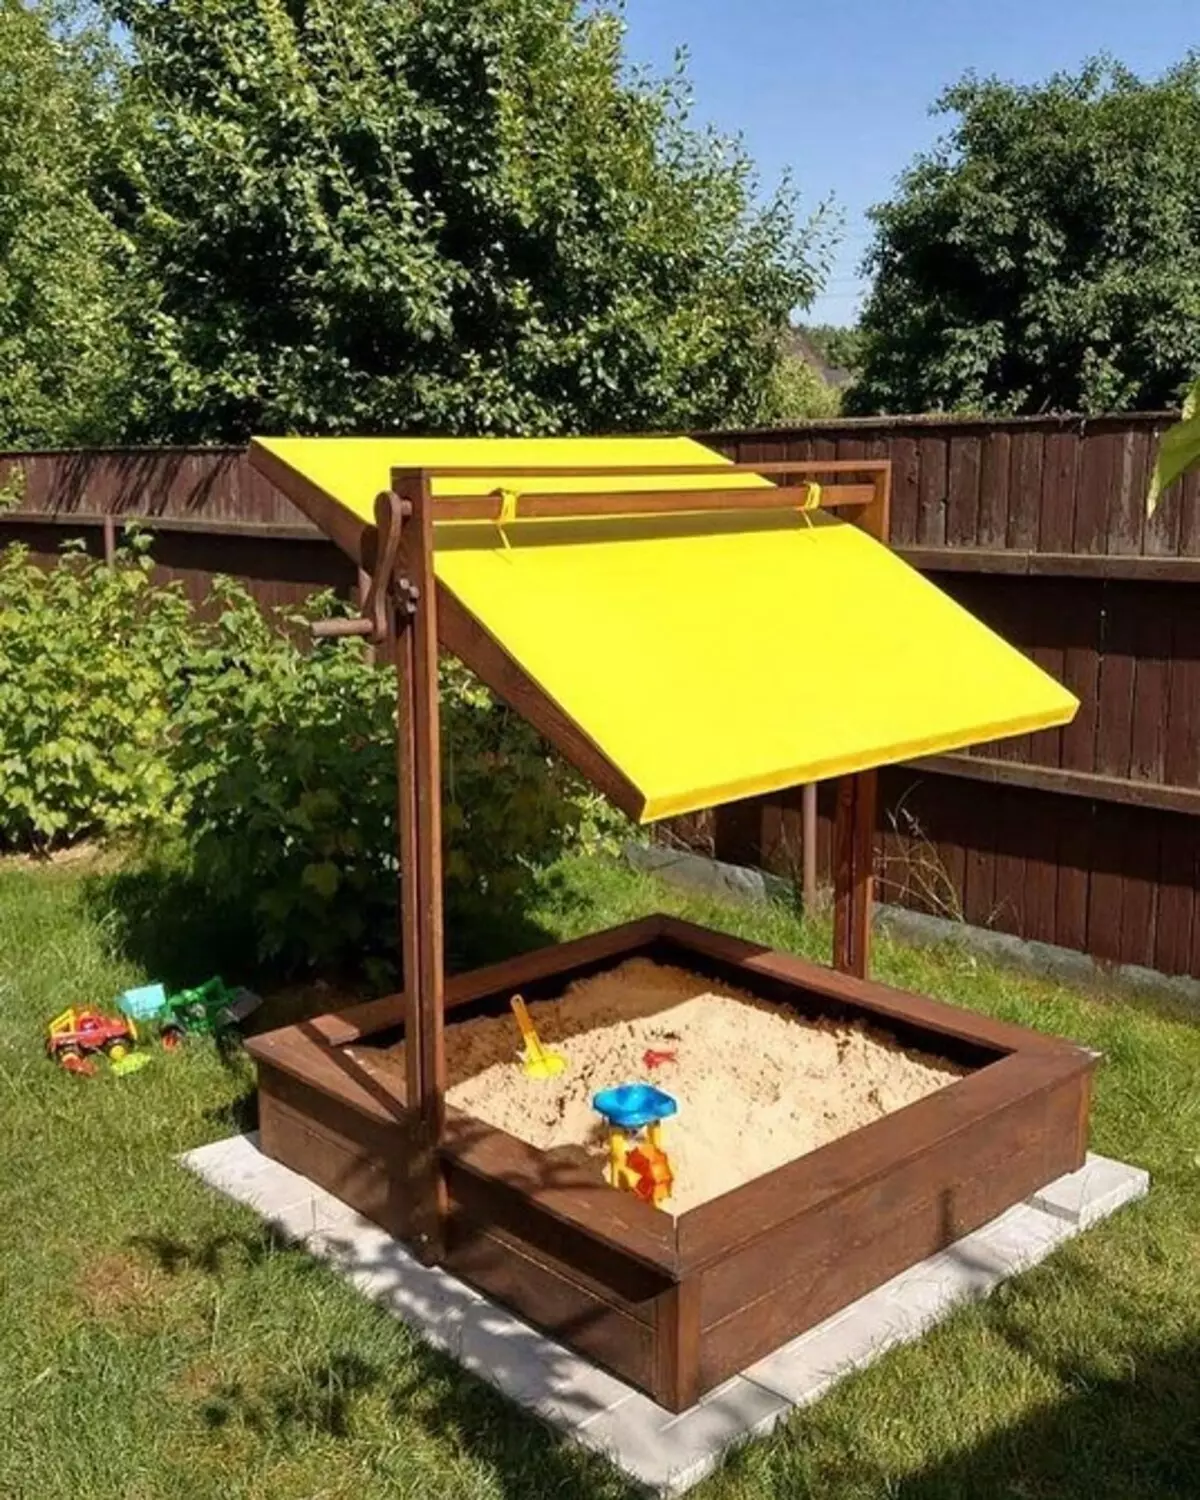 How to make a sandbox in the country with your own hands: 4 simple options 7522_11